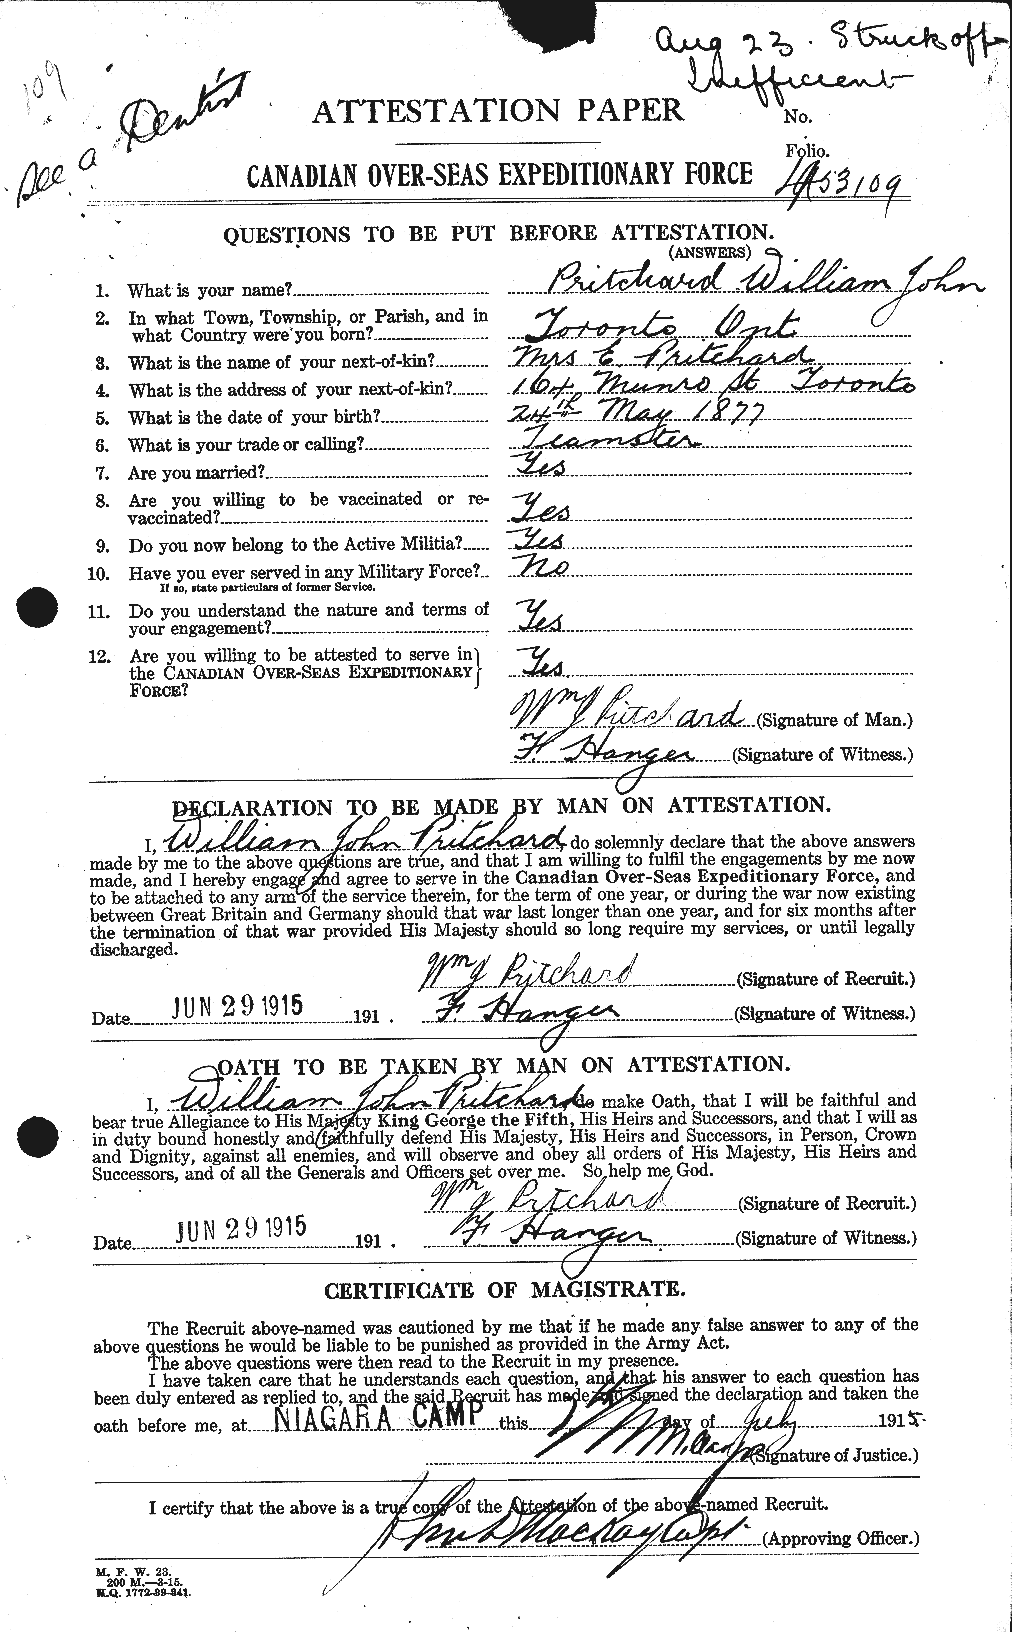 Personnel Records of the First World War - CEF 588629a